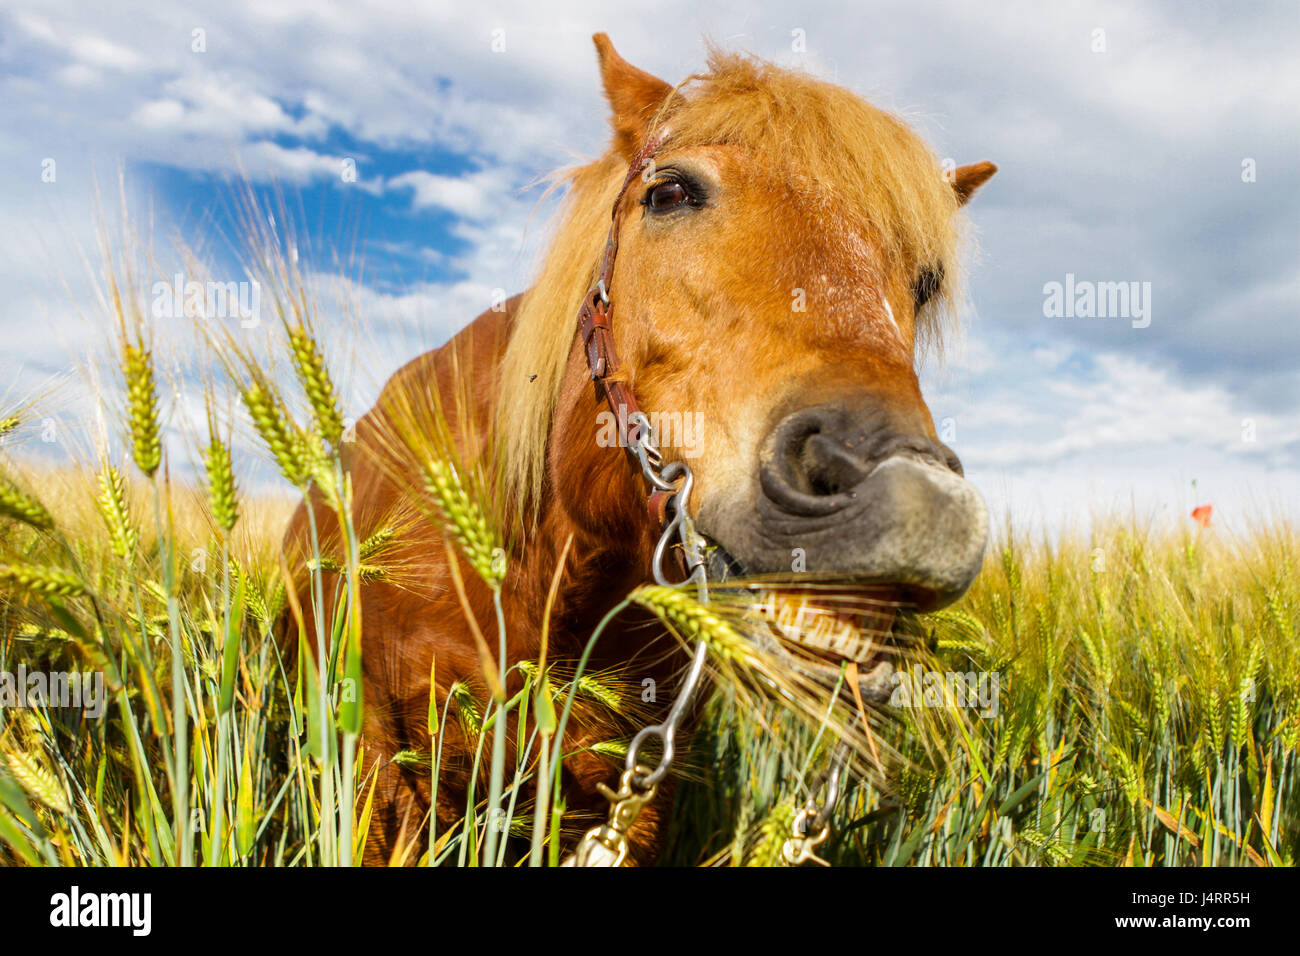 funny horse in a barley field Stock Photo